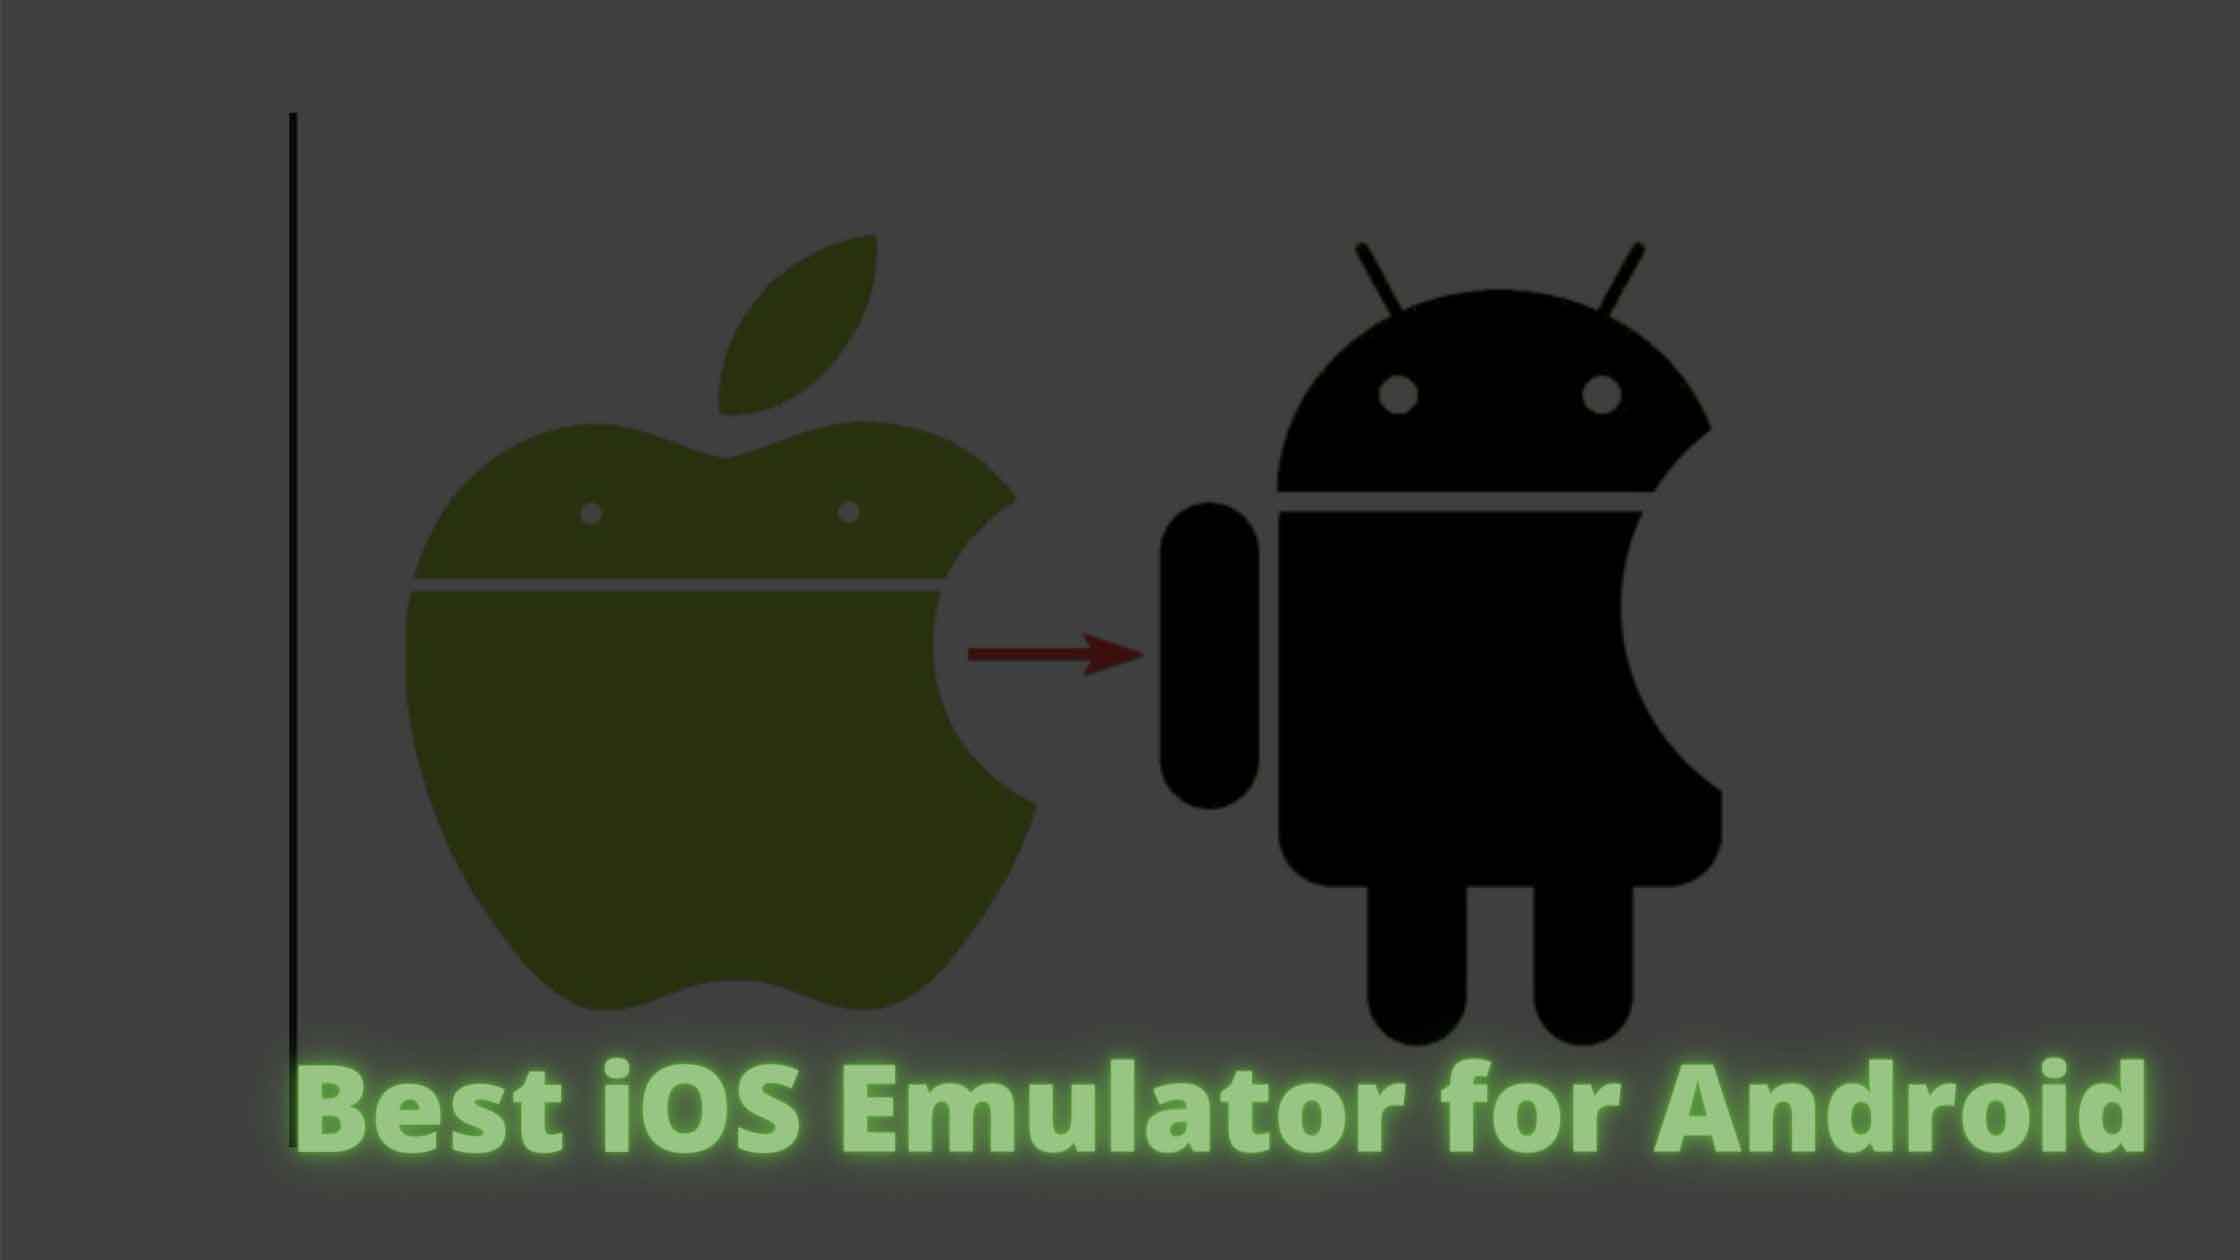 5 Best iOS Emulator for Android of 2022